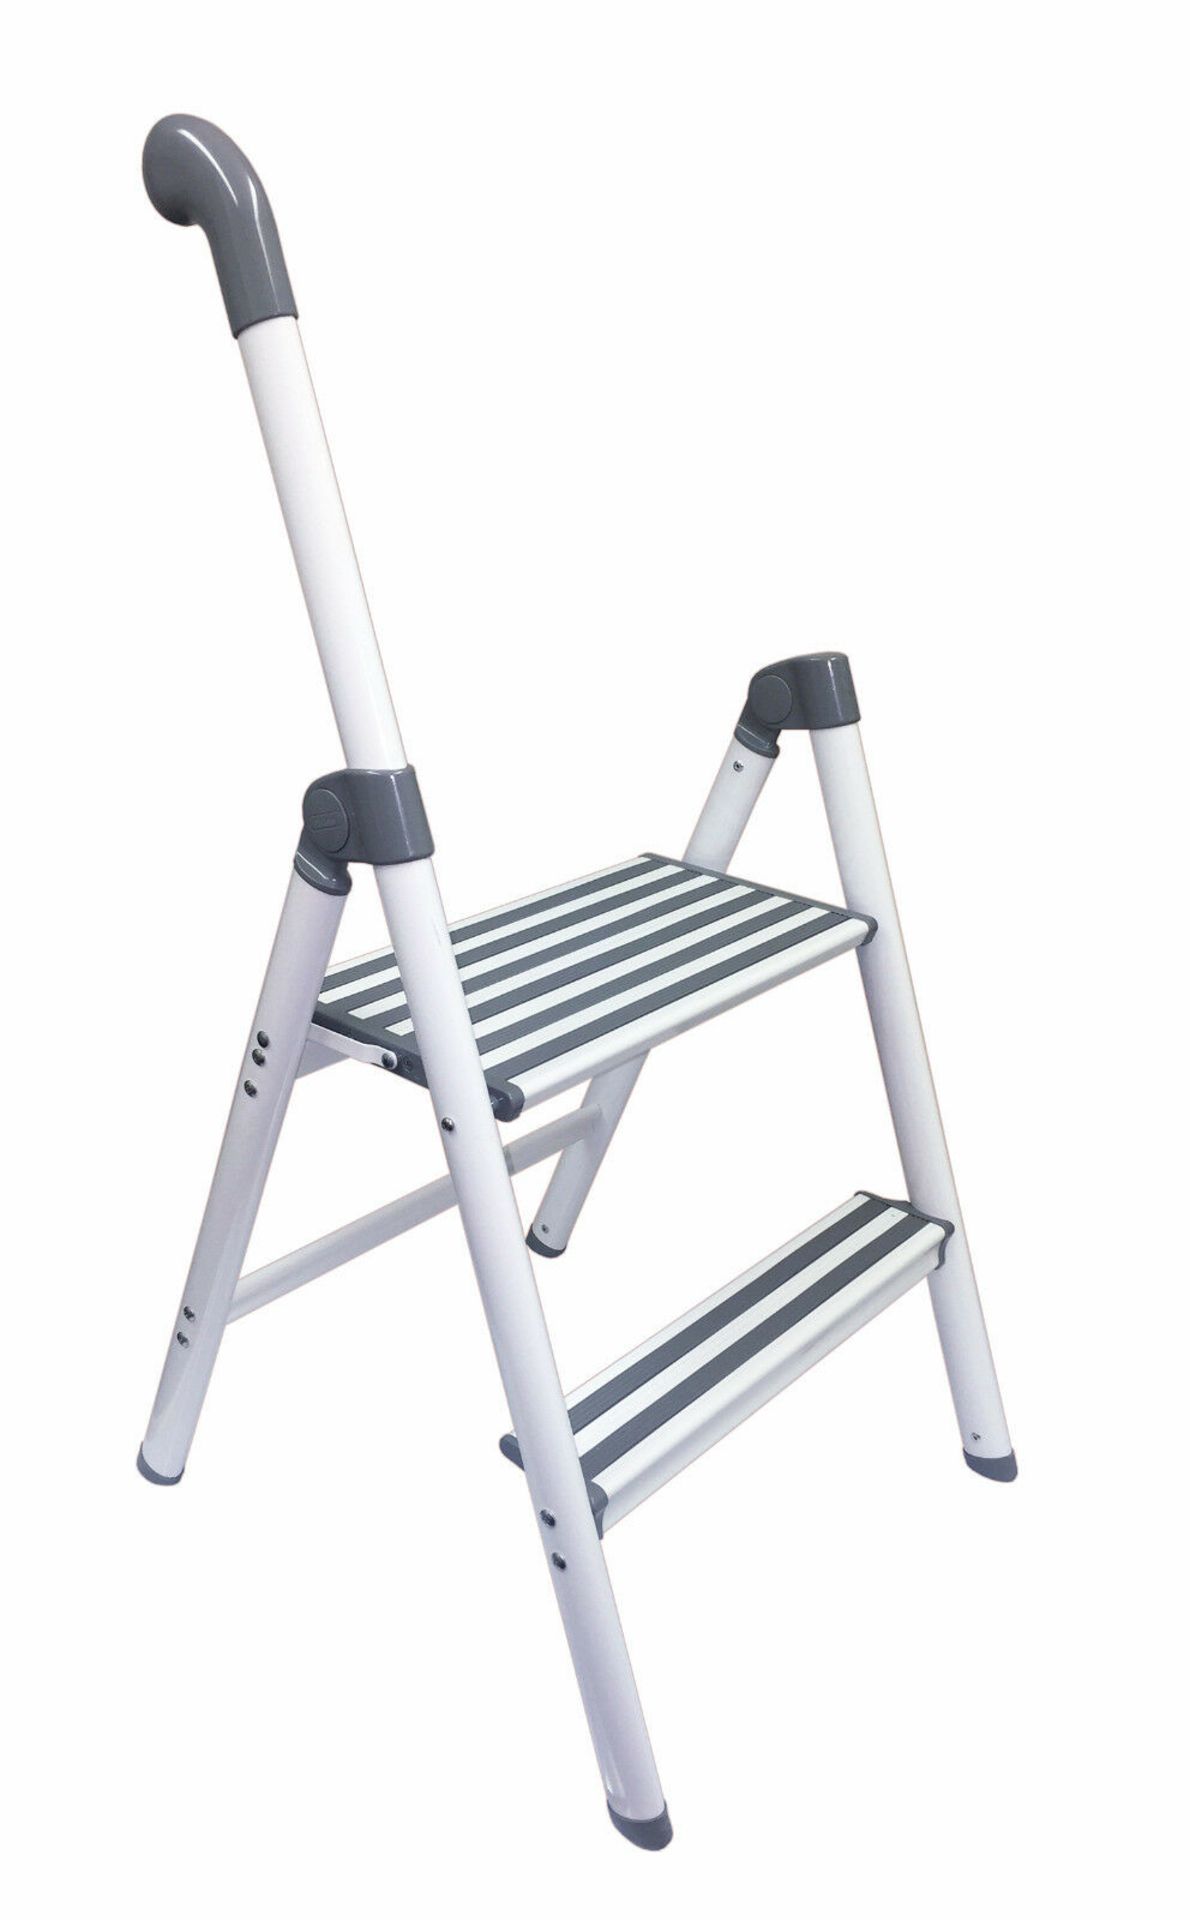 20 x two step aluminium folding ladder with support handle (white) (zzd2rh)